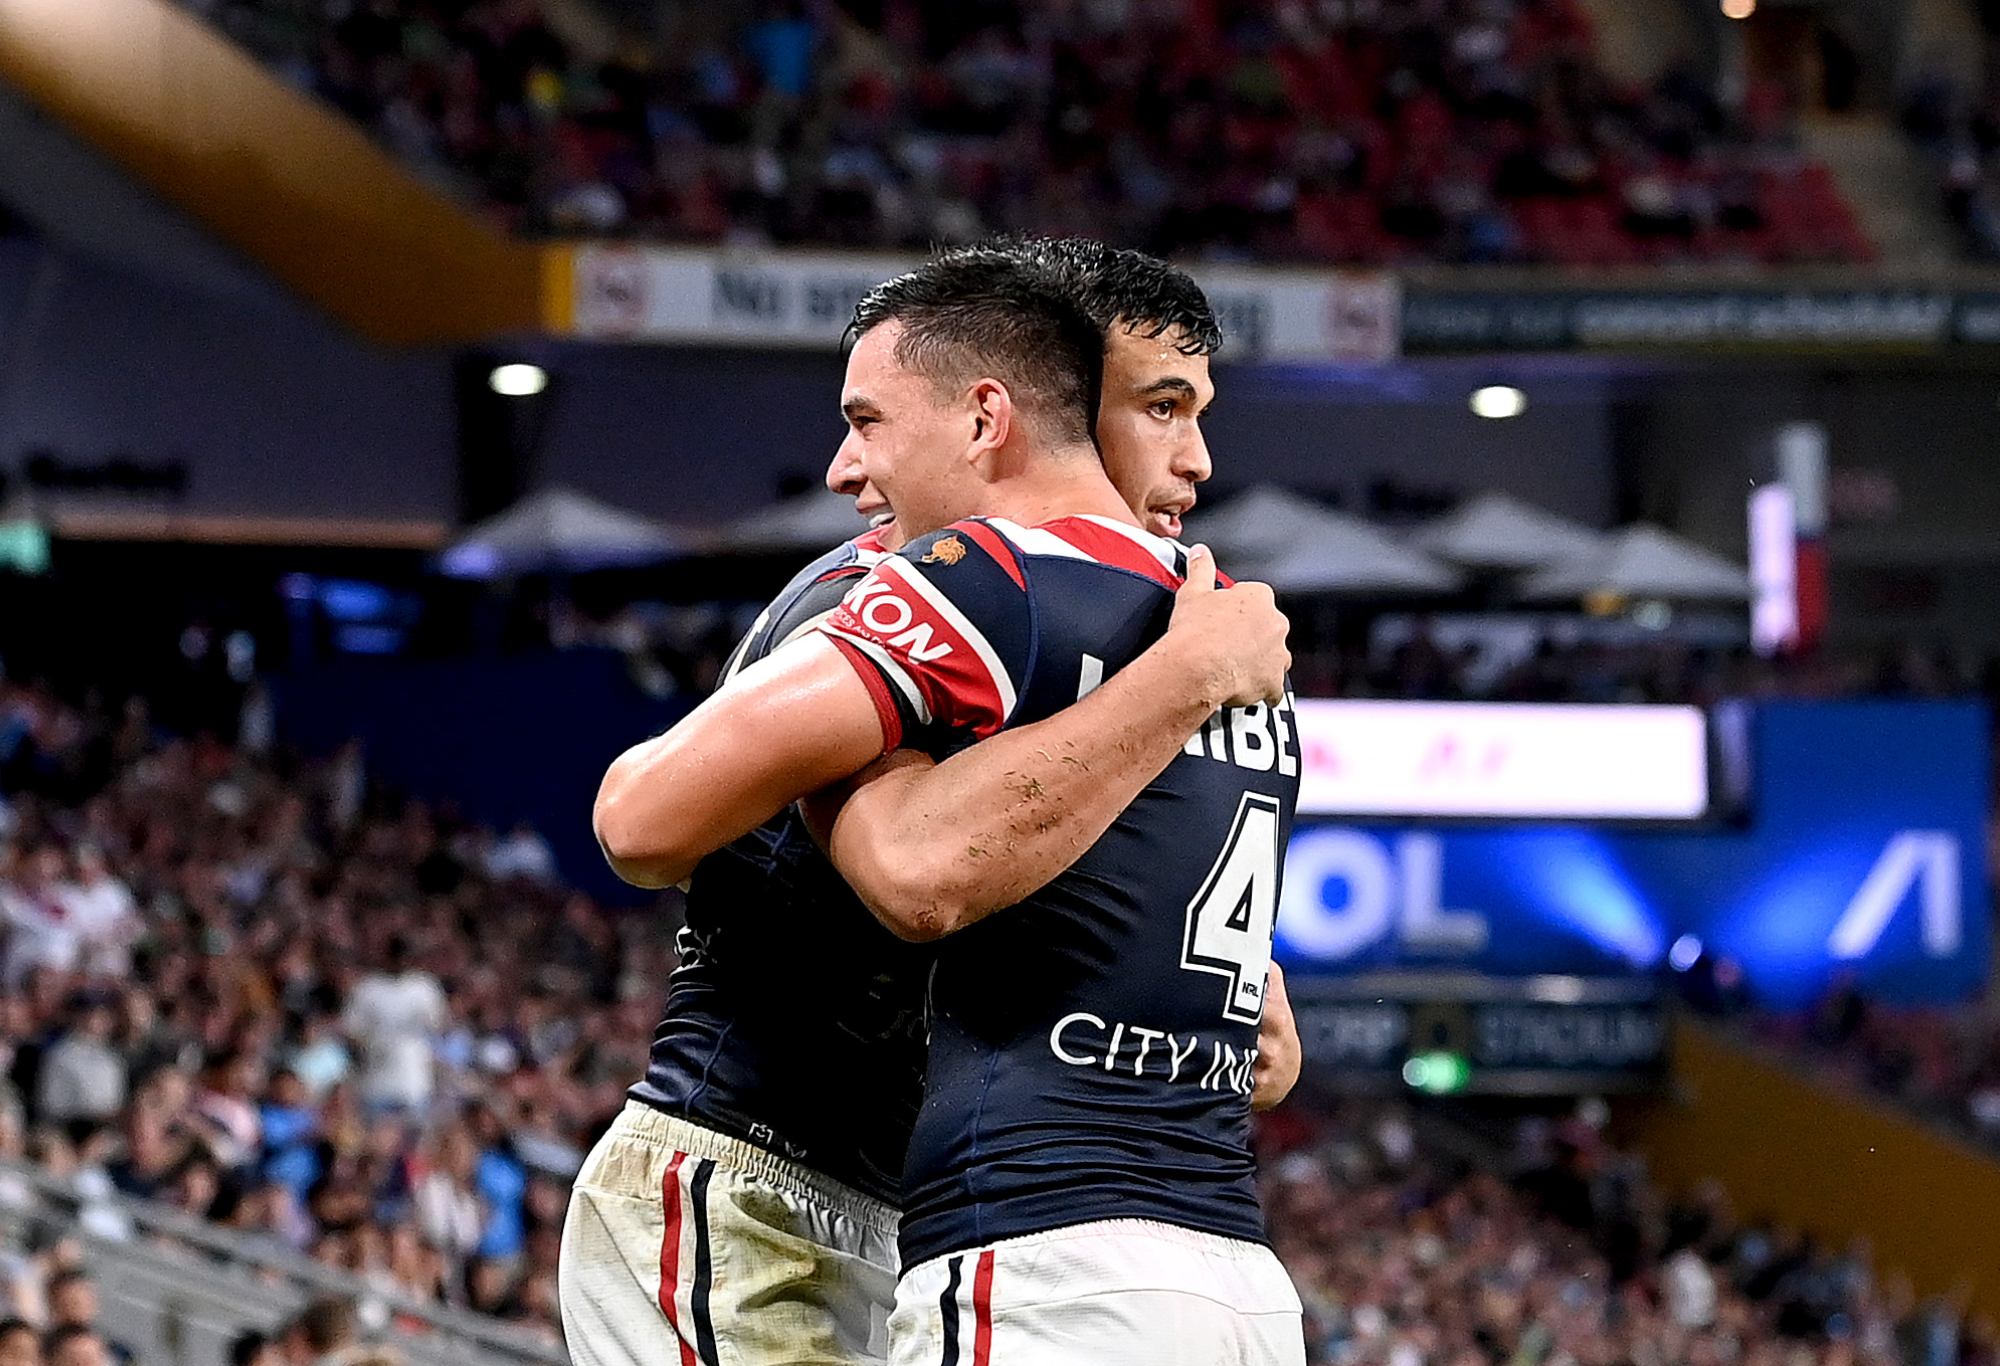 BRISBANE, AUSTRALIA - MAY 15: Joseph Suaalii of the Roosters celebrates with team mate Joseph Manu after scoring a try during the round 10 NRL match between the Sydney Roosters and the Parramatta Eels at Suncorp Stadium, on May 15, 2022, in Brisbane, Australia. (Photo by Bradley Kanaris/Getty Images)